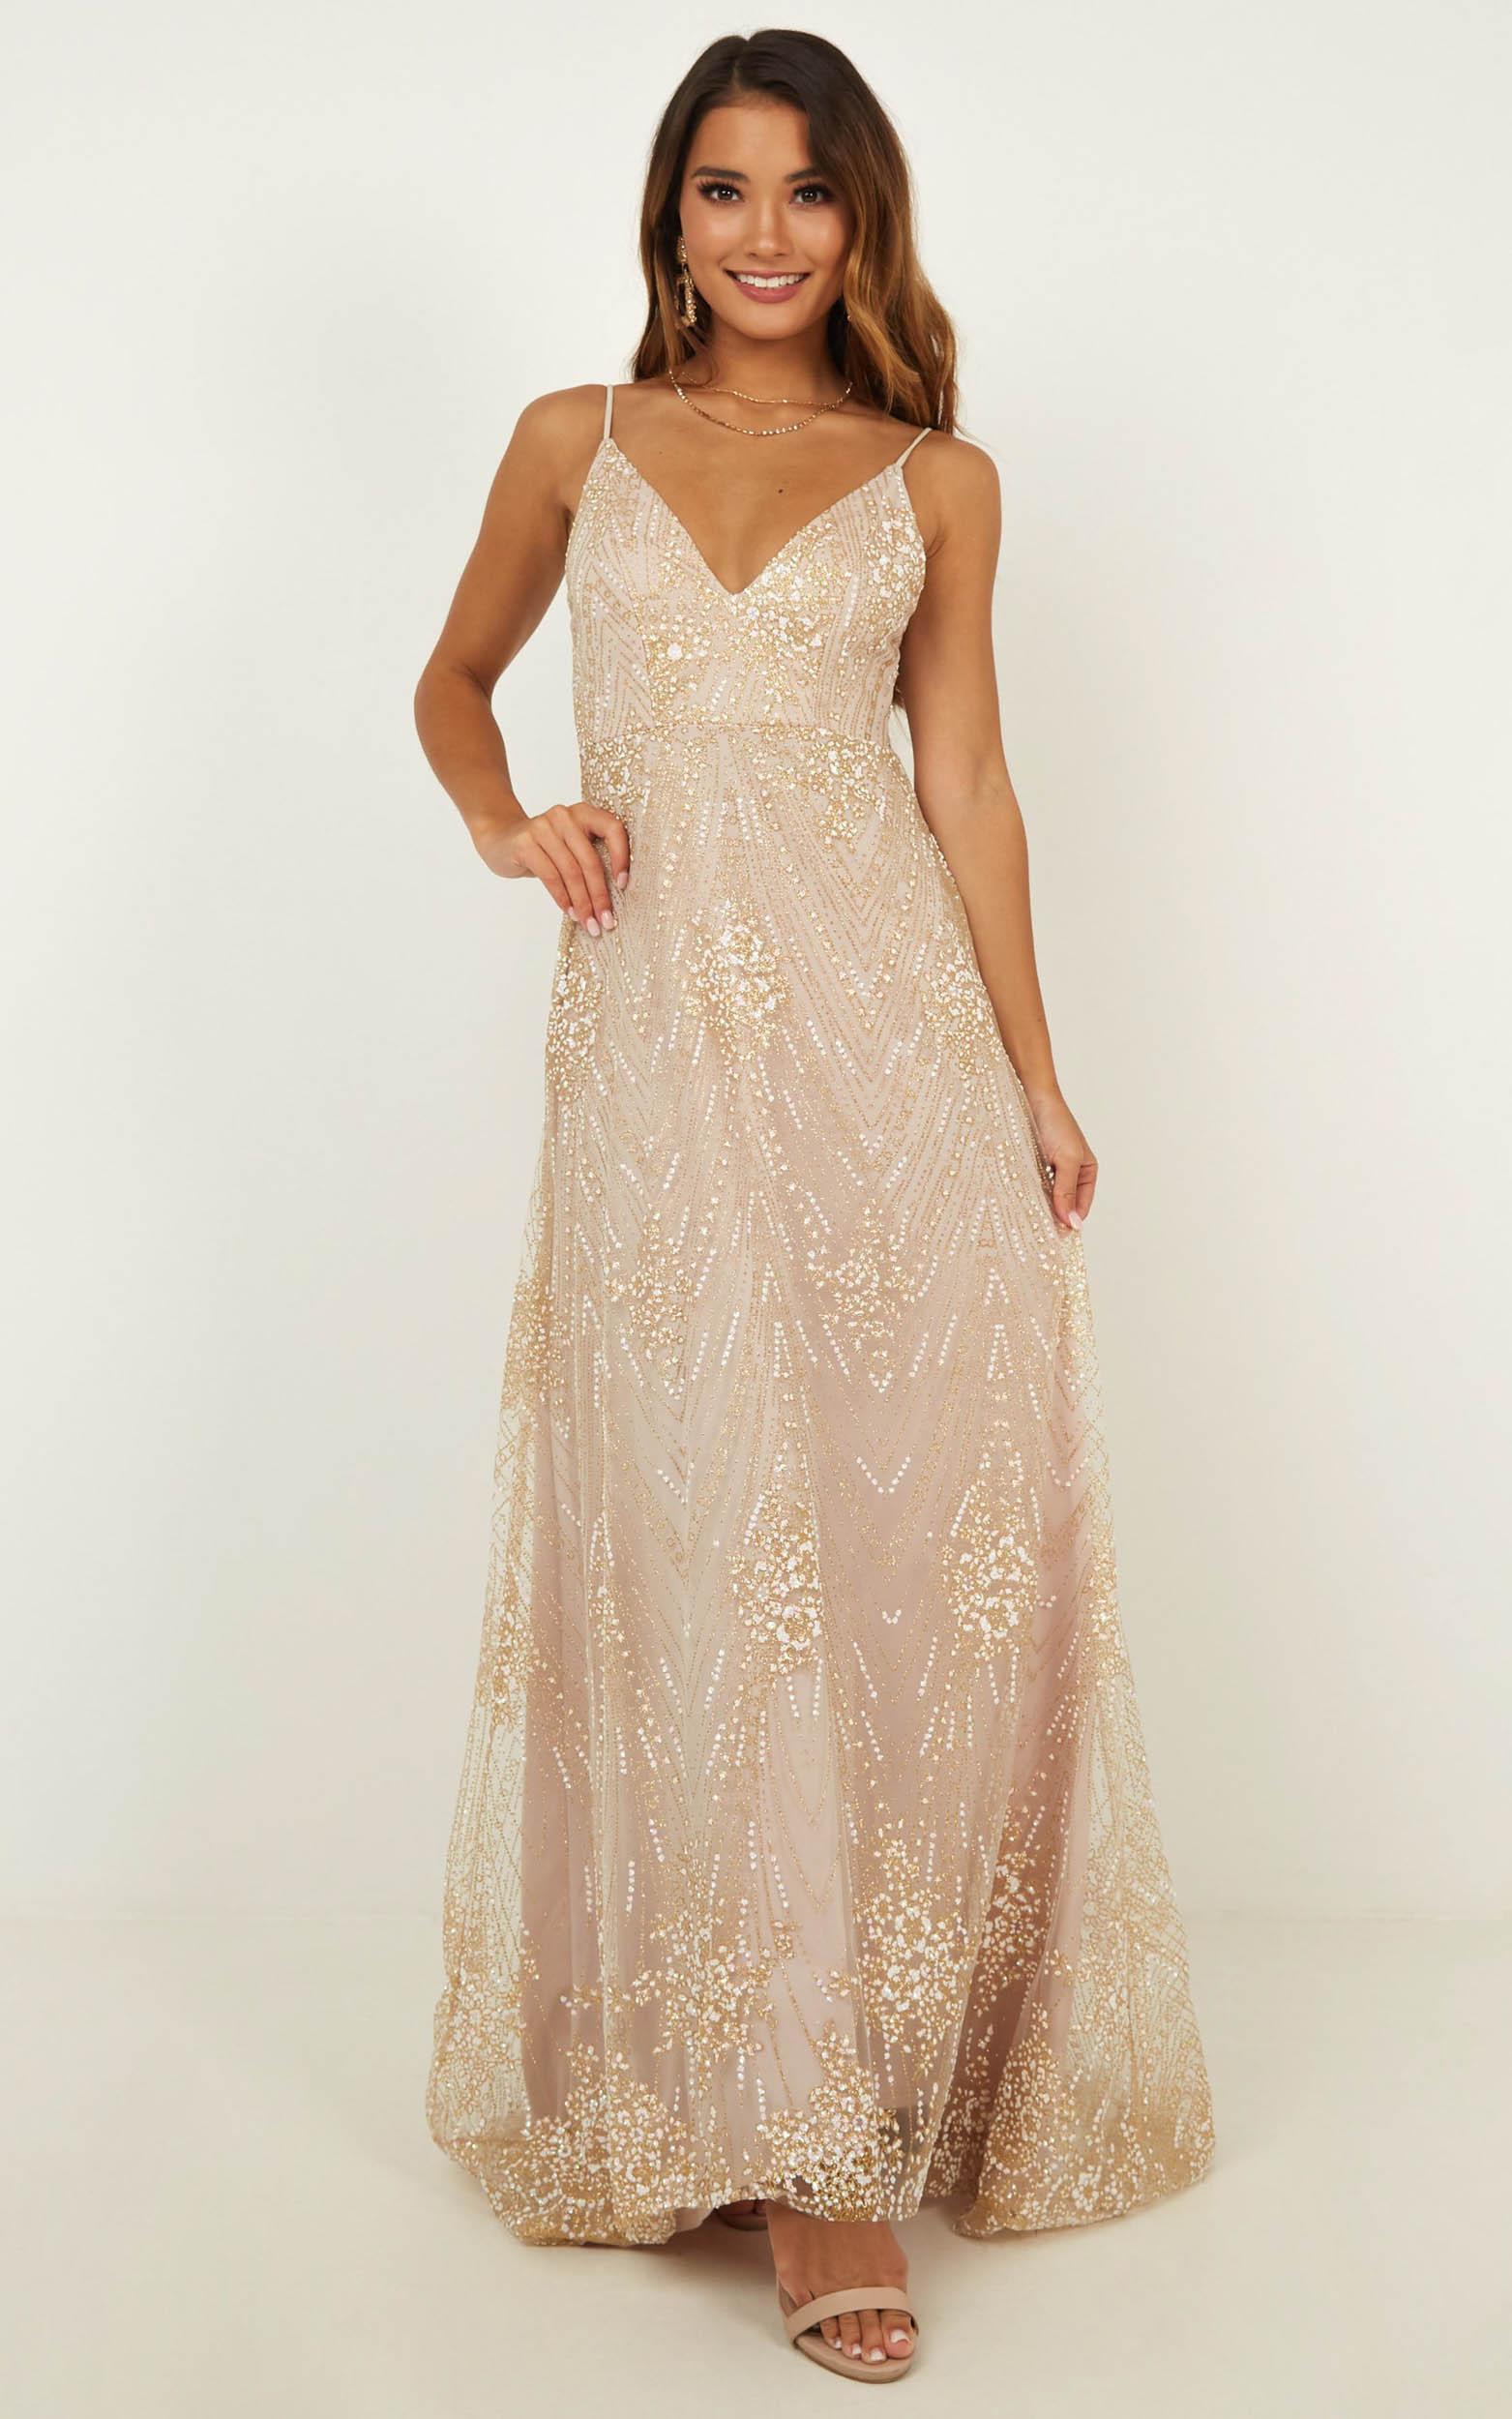 where to buy mother of bride dresses near me